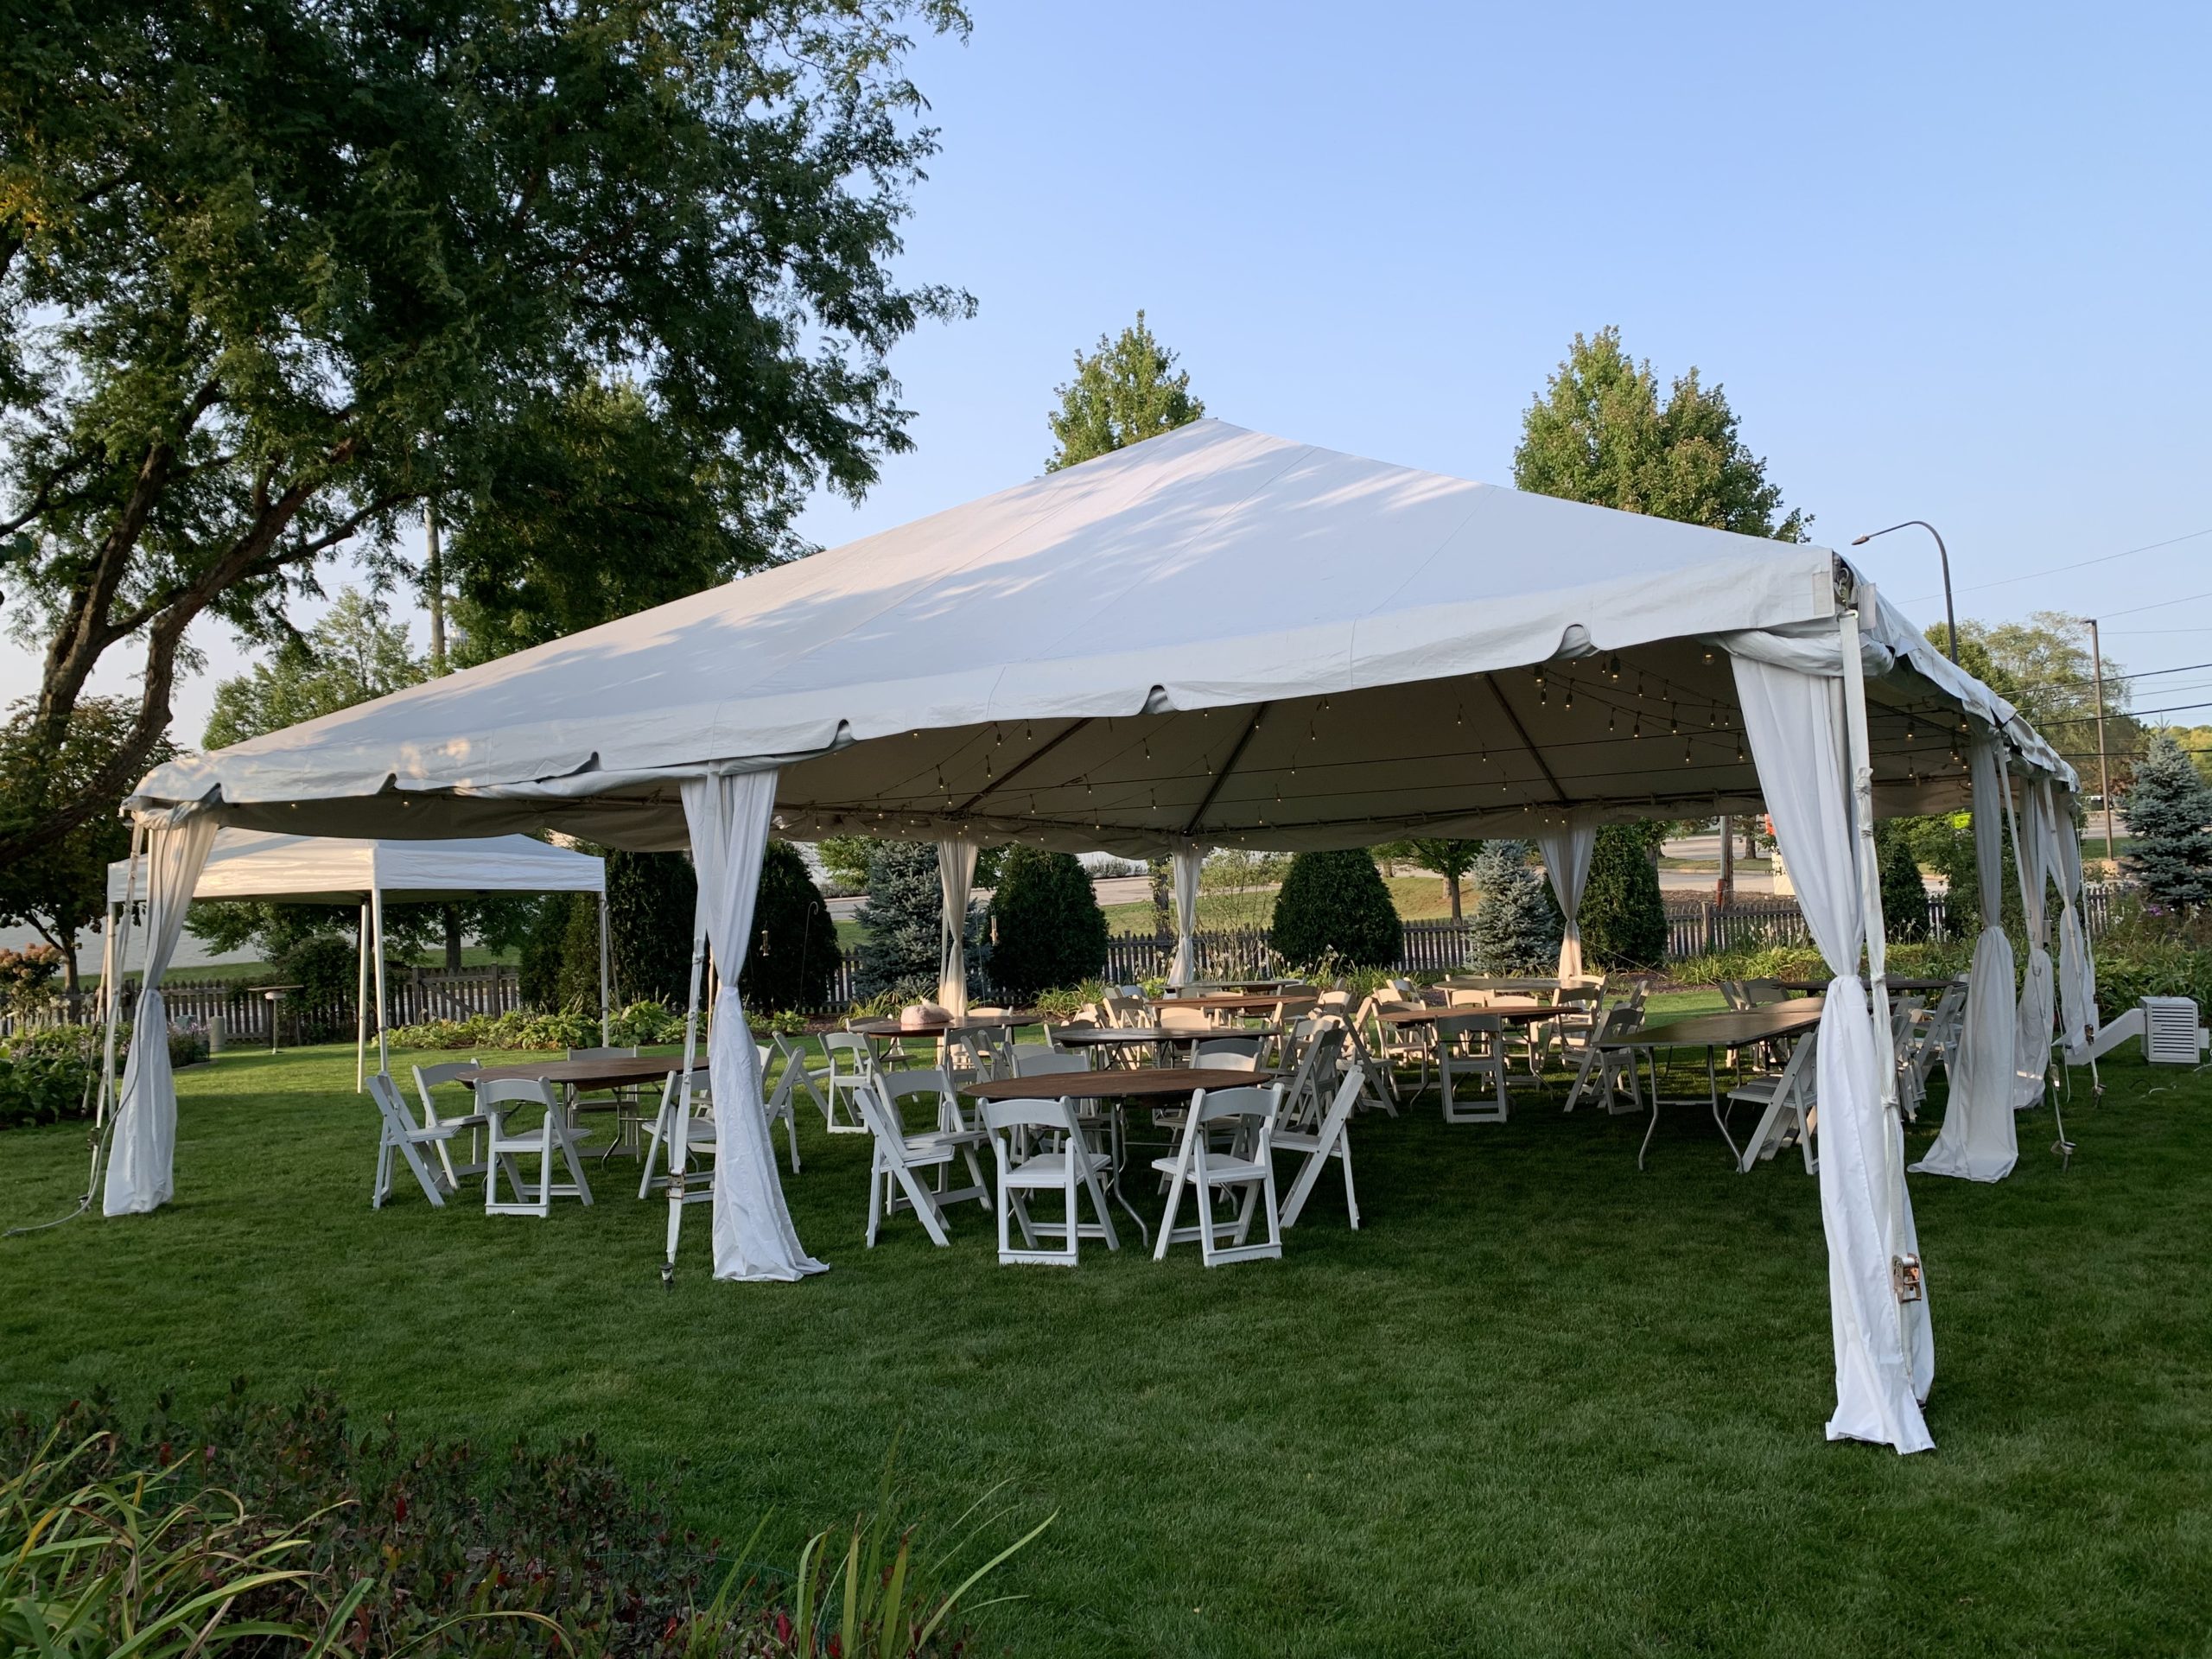 Inflatable Tents For Sale Used Party Tents For Sale